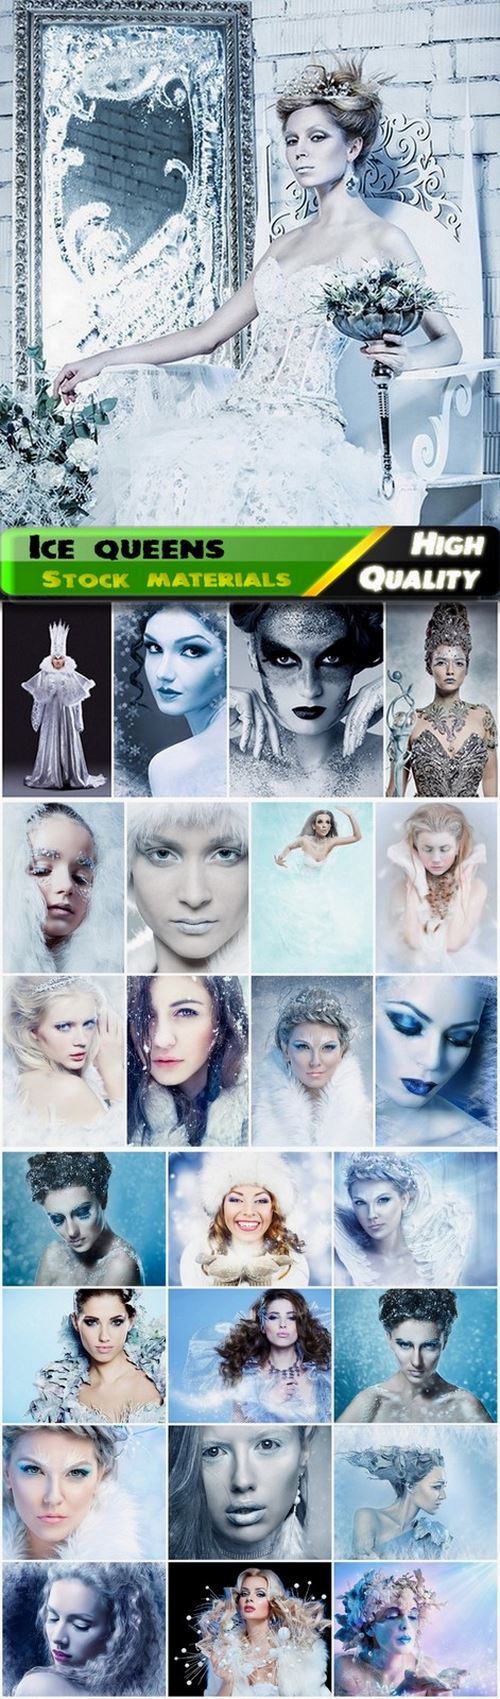 Ice queen and women with cold makeup - 25 HQ Jpg